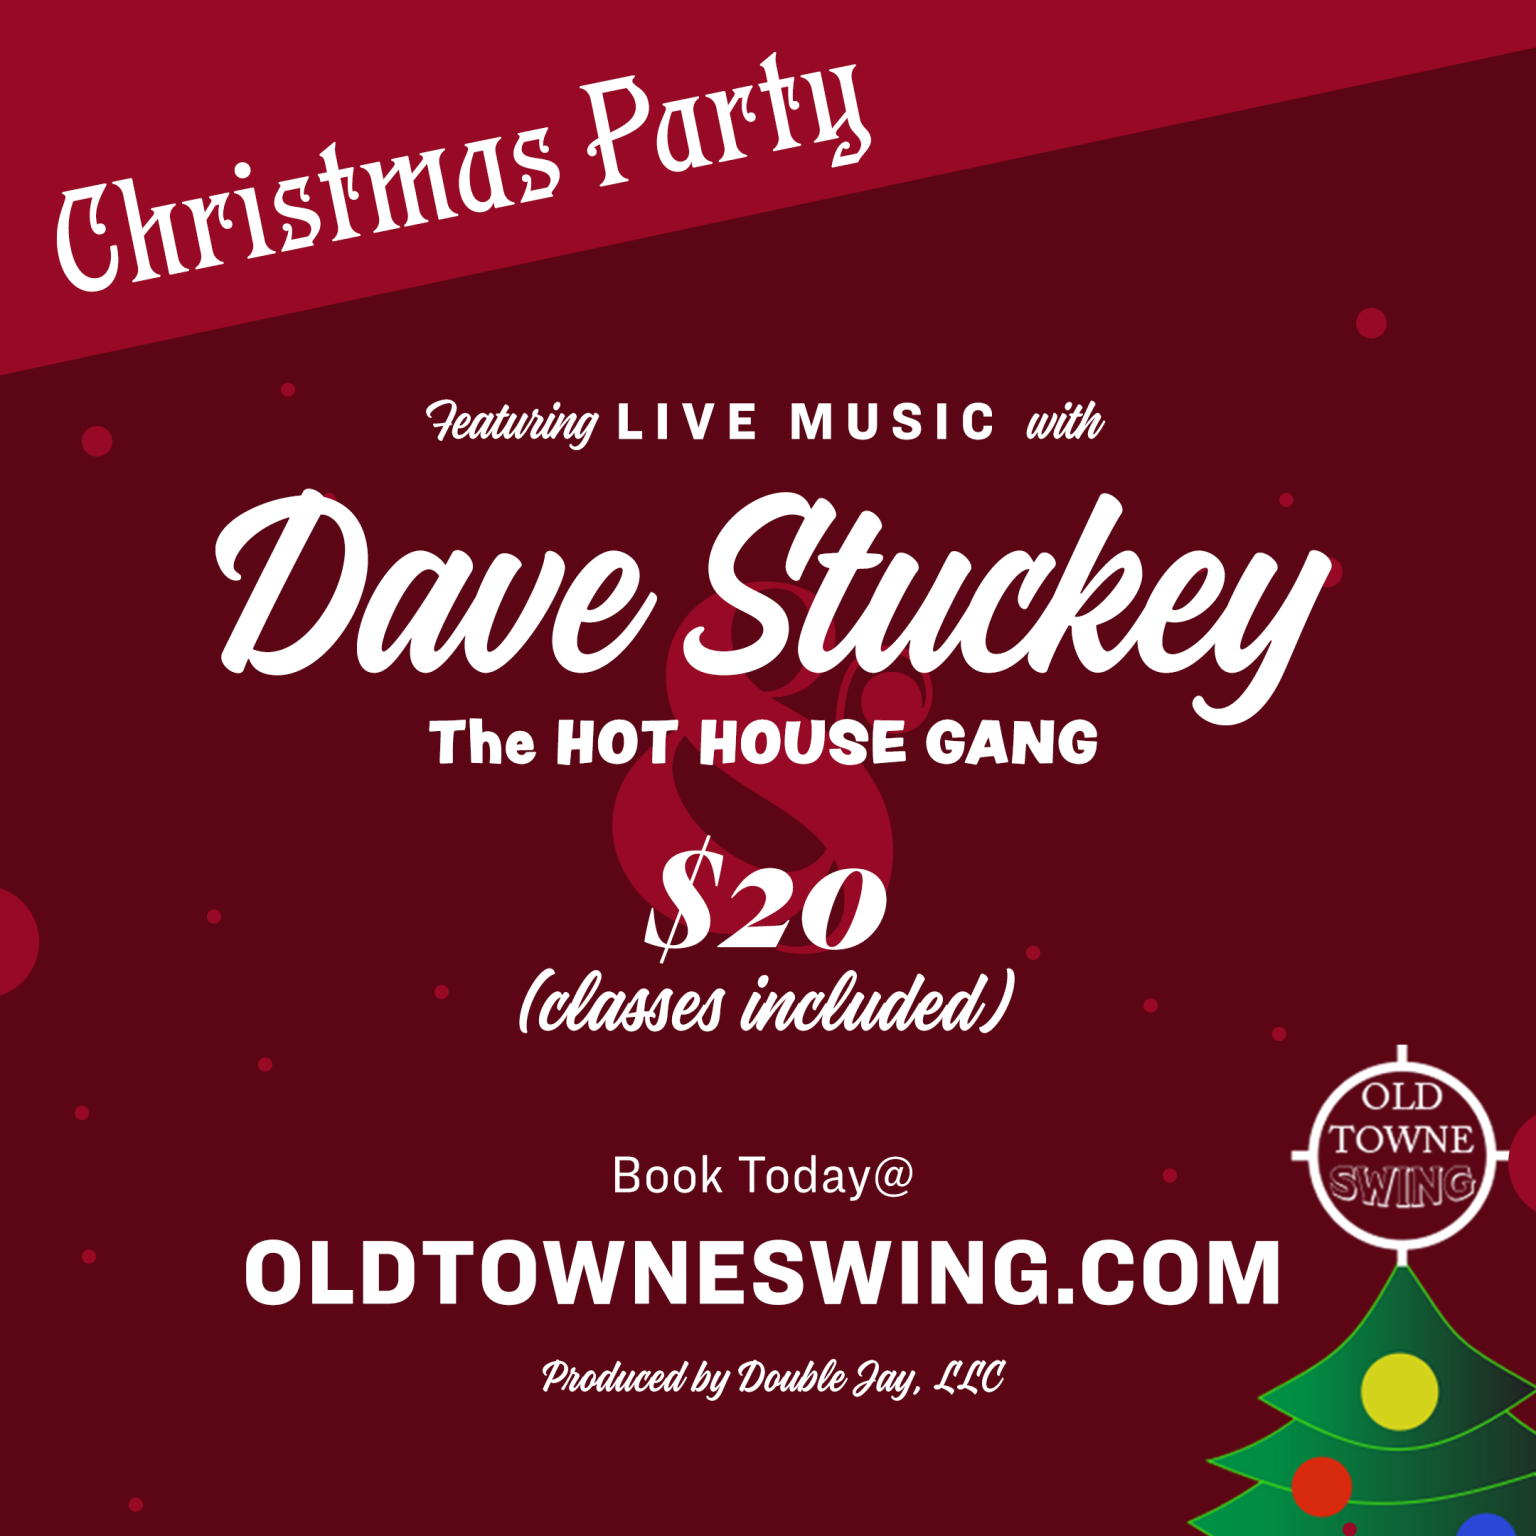 Dave Stuckey & the Hot House at Old Towne Swing